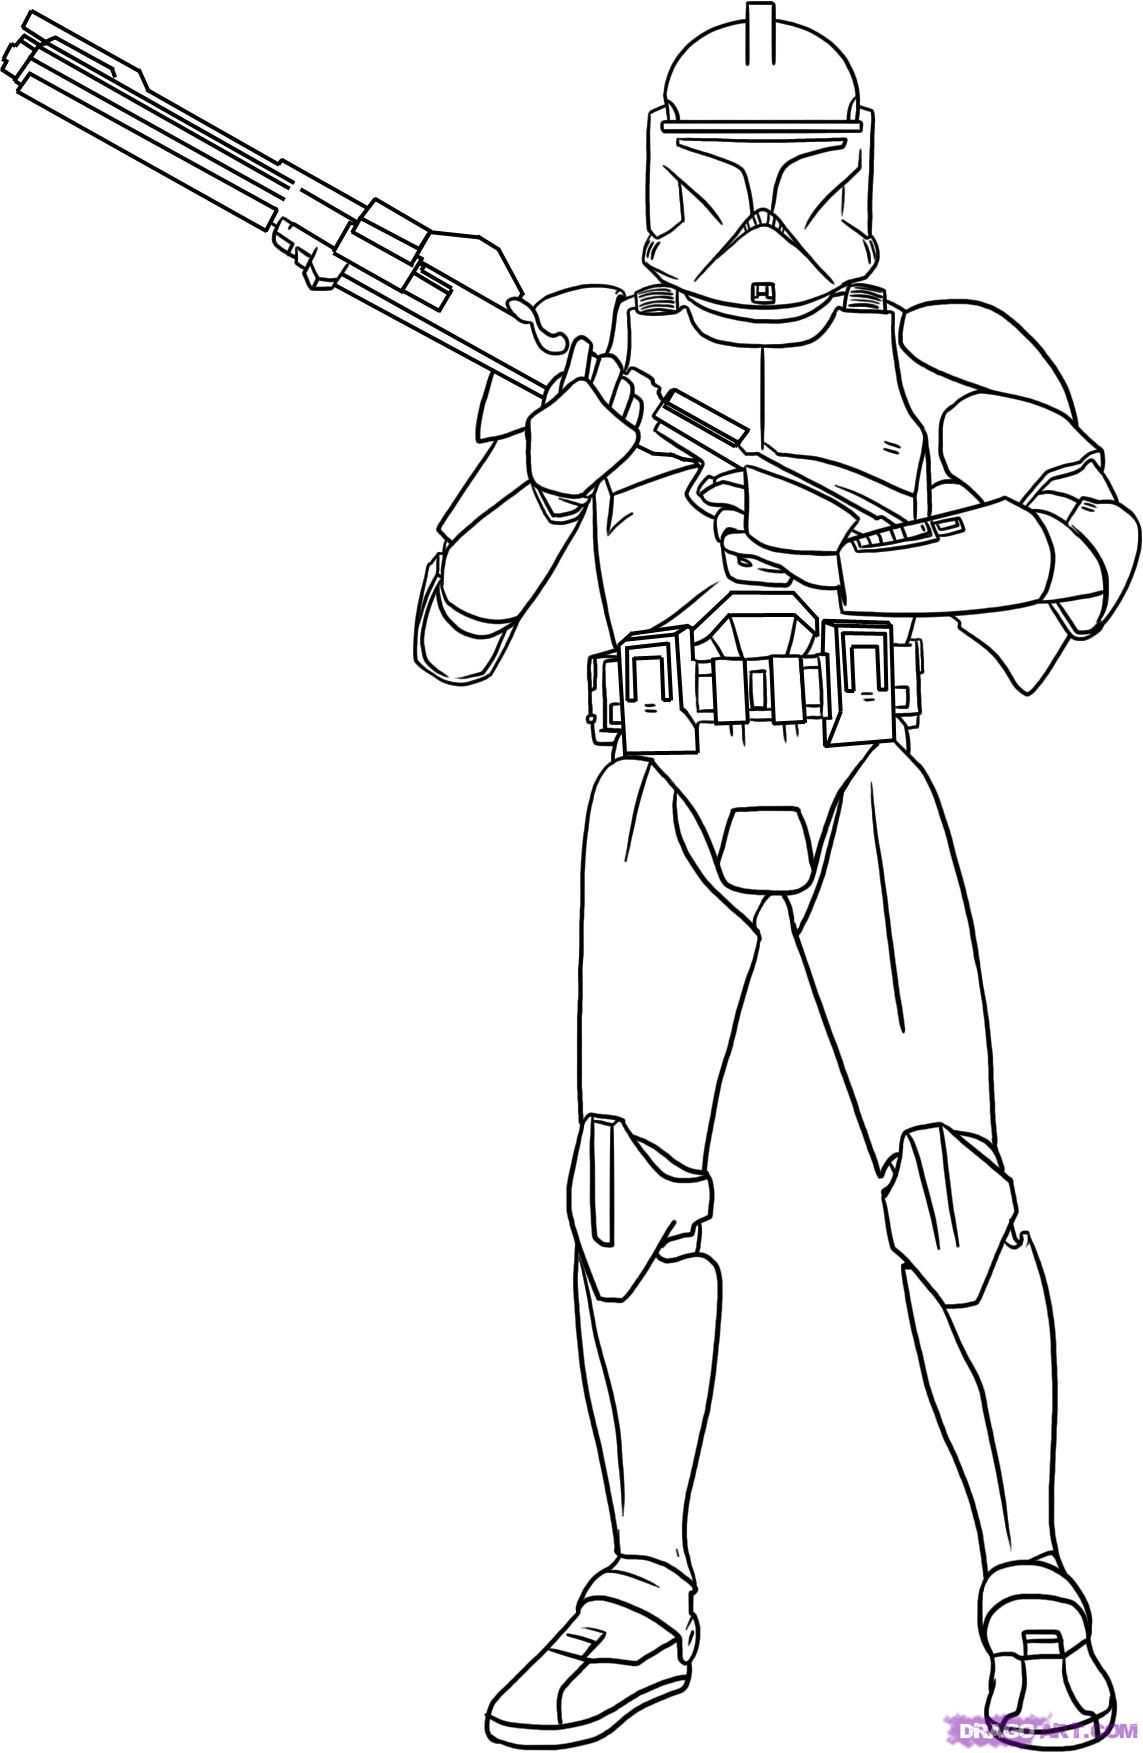 Star Wars Coloring Pages Free Printable Star Wars Coloring Pages Star Wars Drawings Star Wars Coloring Book Star Wars Colors